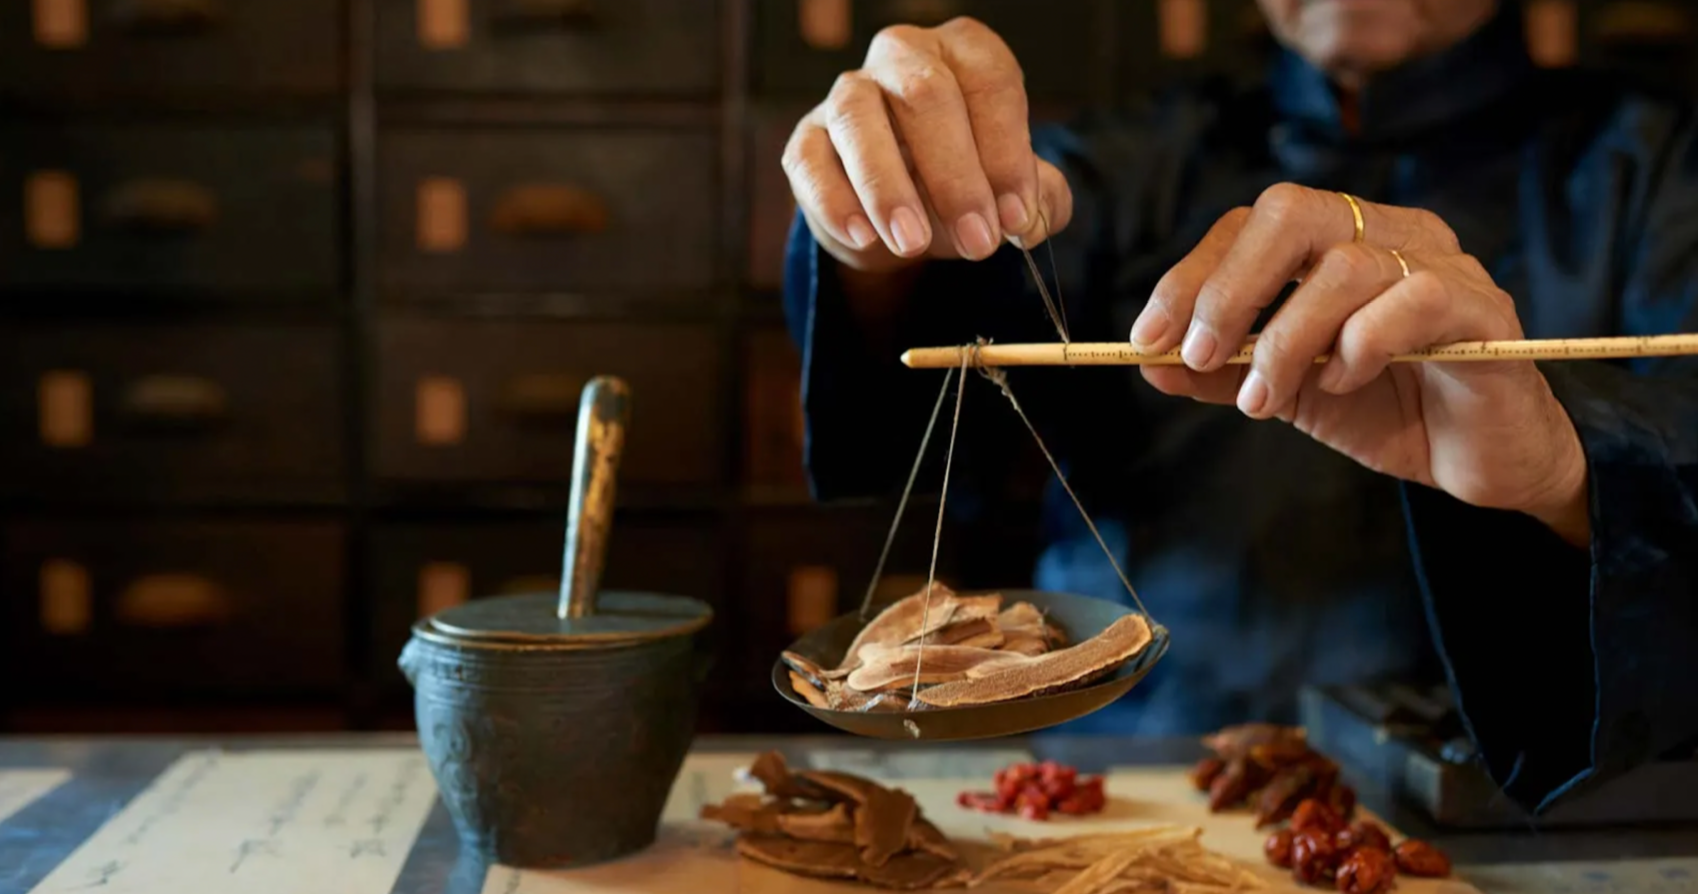 With young consumers embracing the ancient concept of yang sheng, or nourishing life, traditional Chinese medicine (TCM) has become a popular trend. Image: Britannica